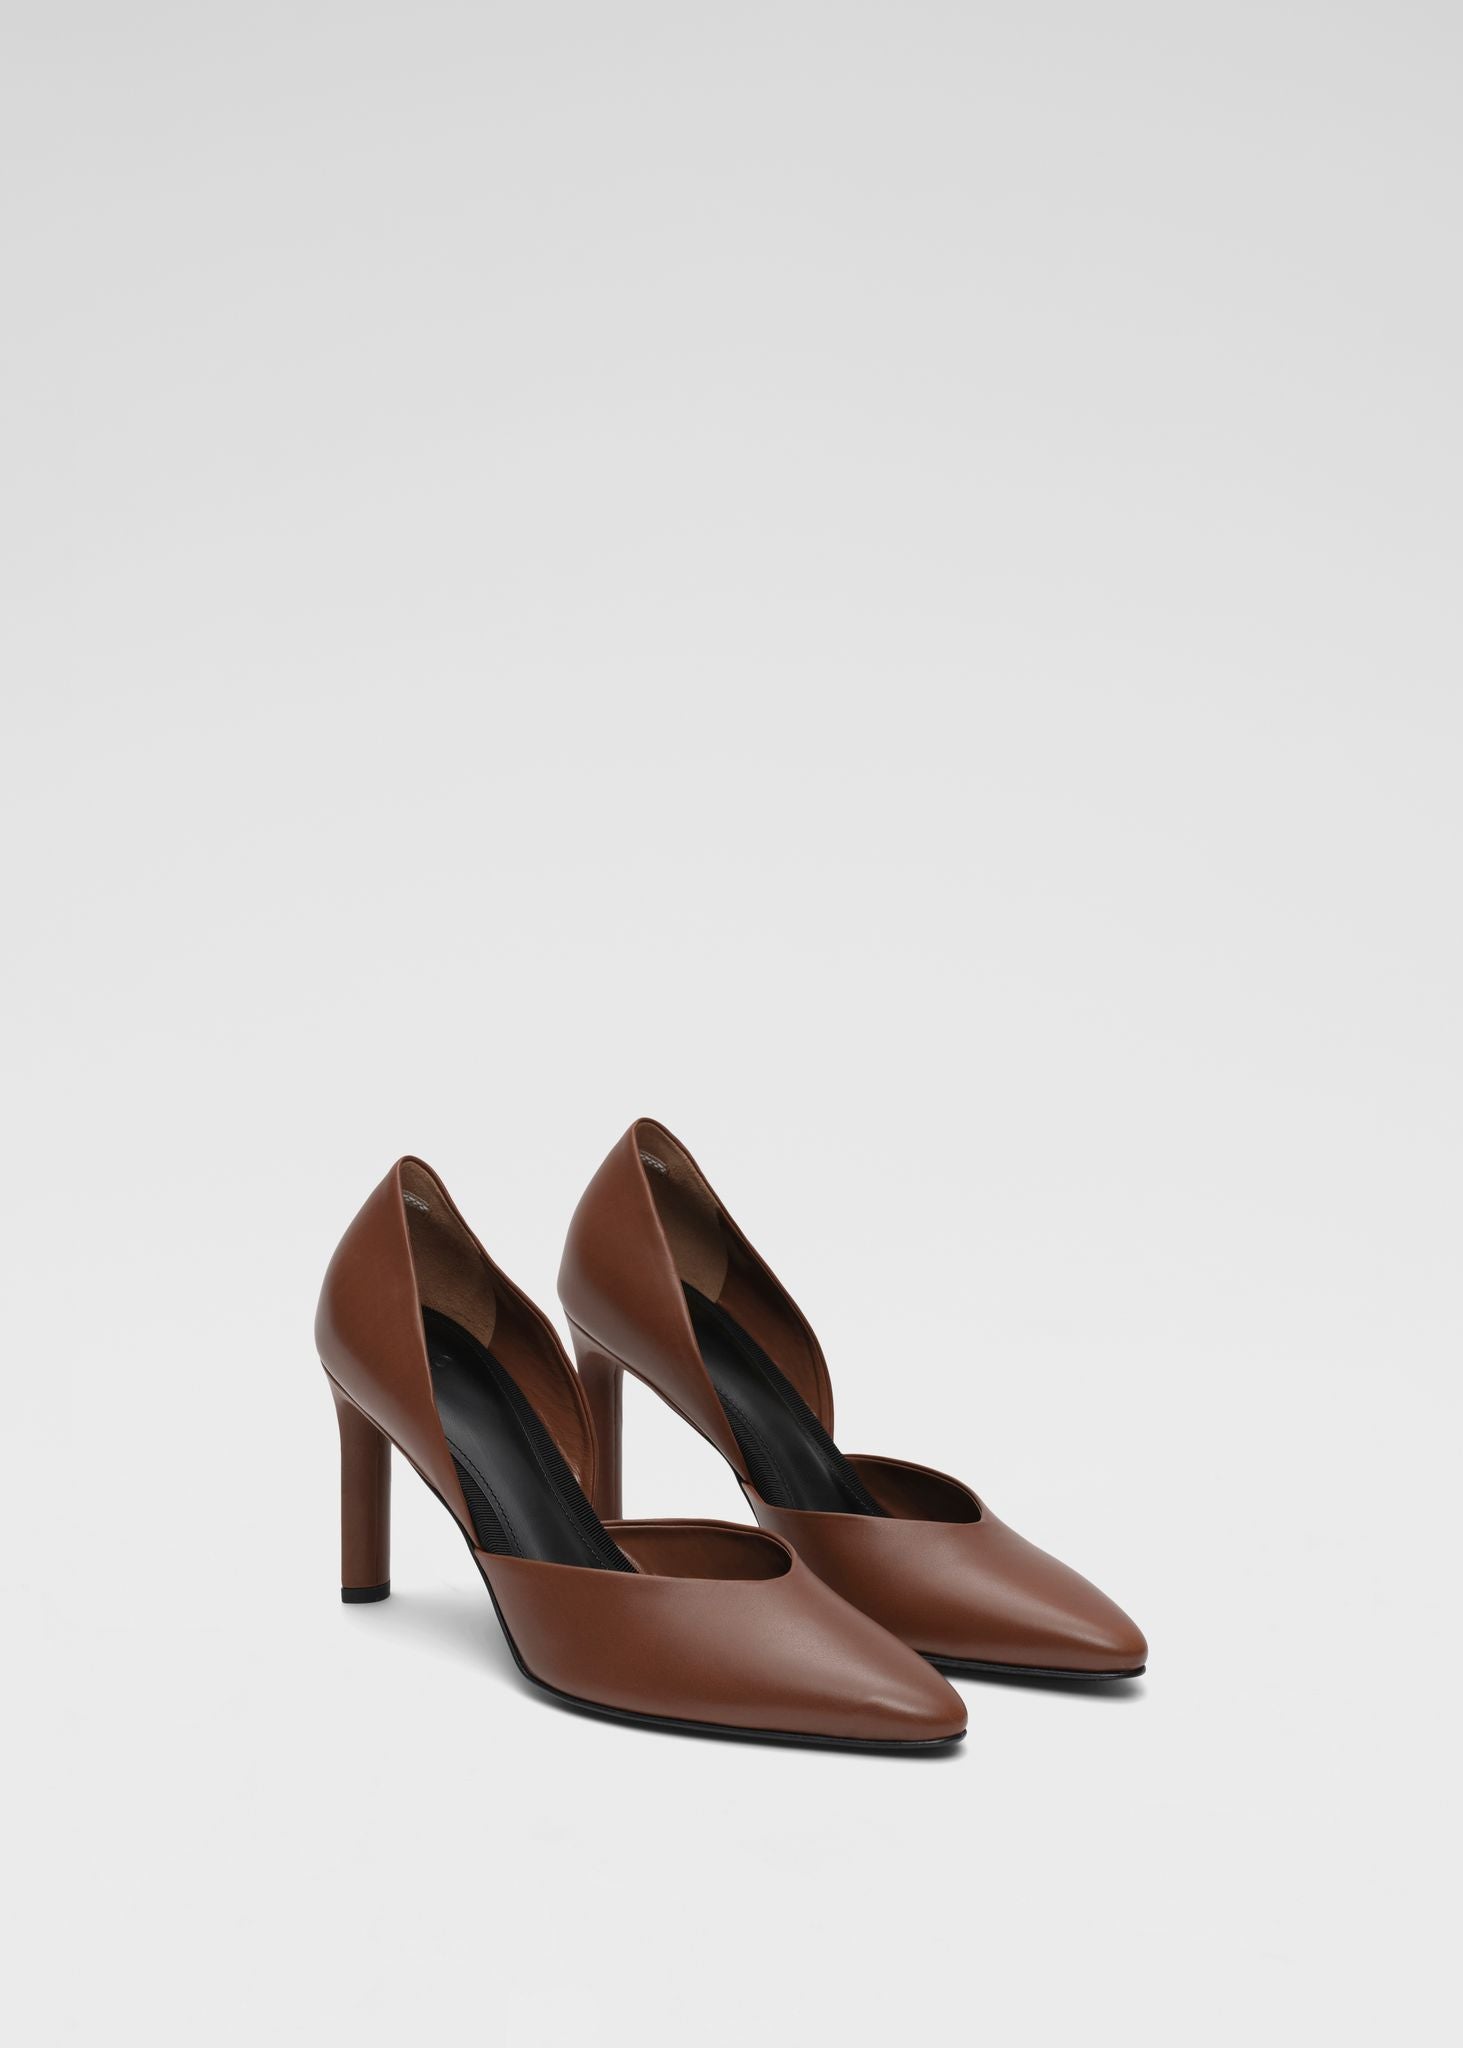 D'Orsay Stiletto Heel in Leather - Chestnut - CO Collections